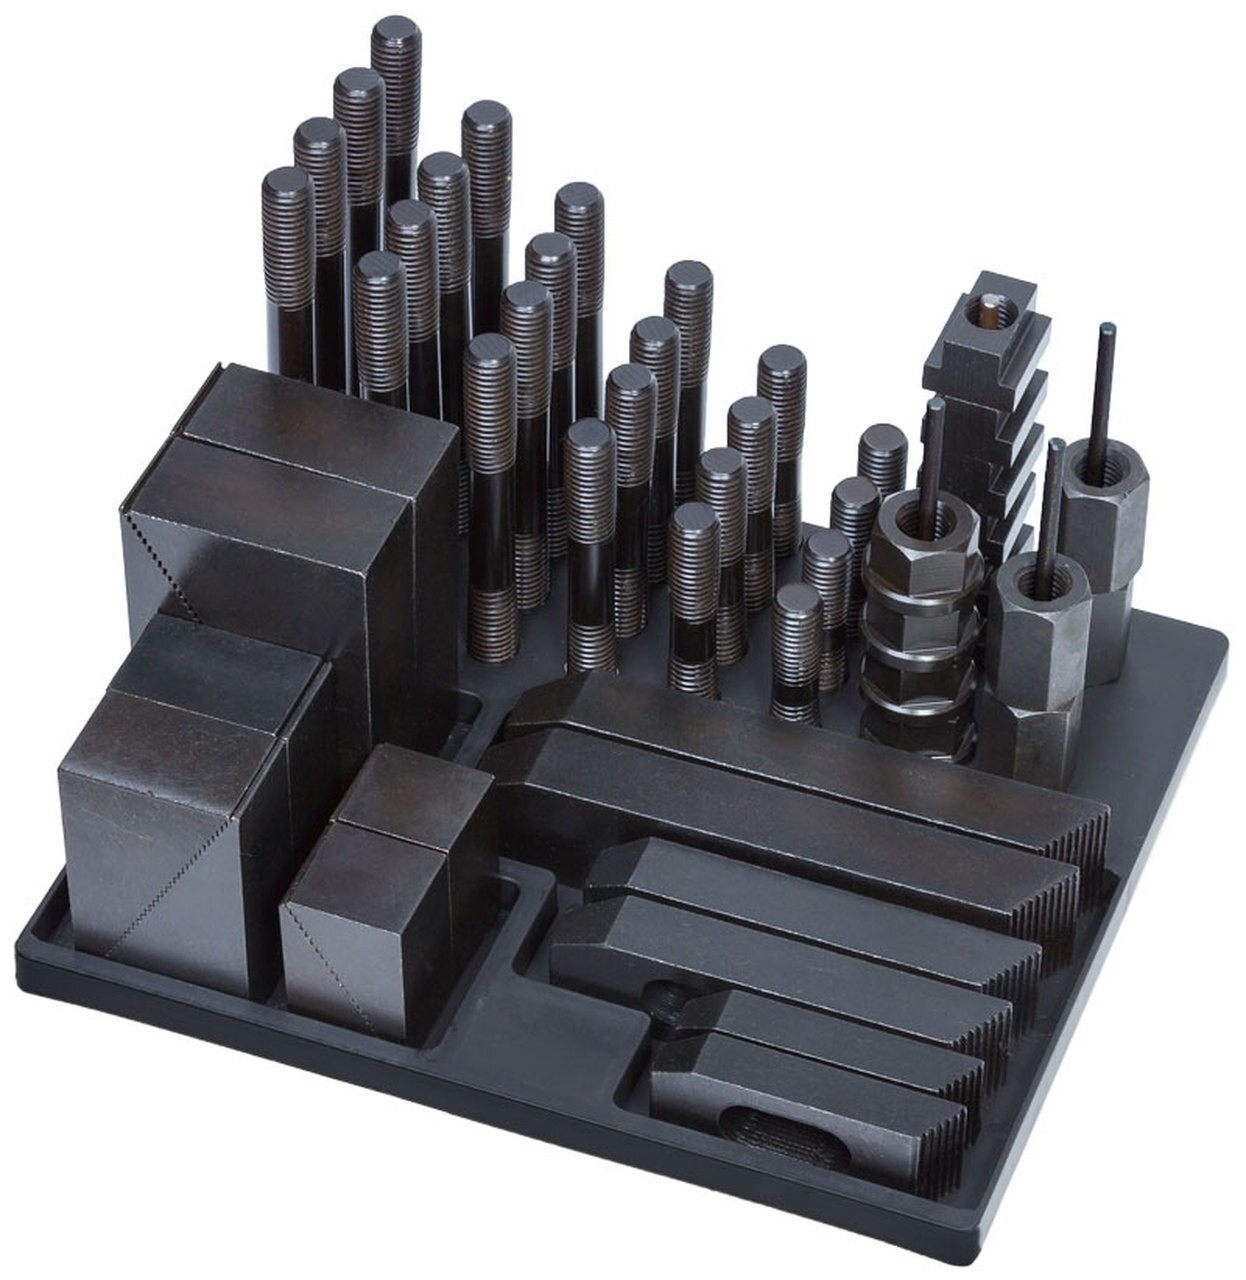 Clamping Kits Metric Size (Model Number CK-18)